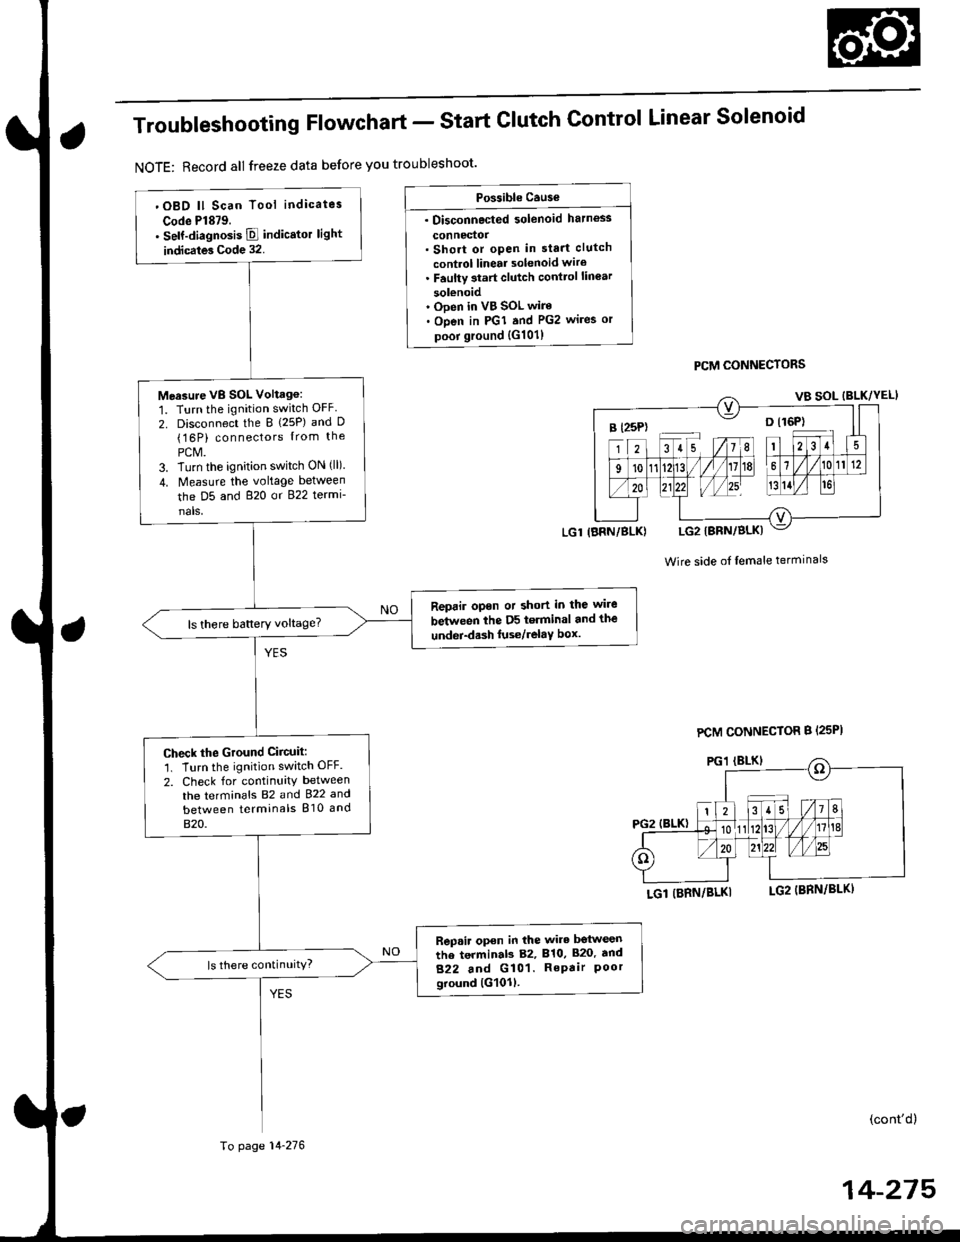 HONDA CIVIC 1996 6.G Workshop Manual Troubleshooting Flowchart - Start
NOTE: Record all freeze data before you troubleshoot
Clutch Control Linear Solenoid
PCM CONNECTORS
Wire side of lemale terminals
LGl (BRN/BLKI
(contd)
14-215
Po$ibl